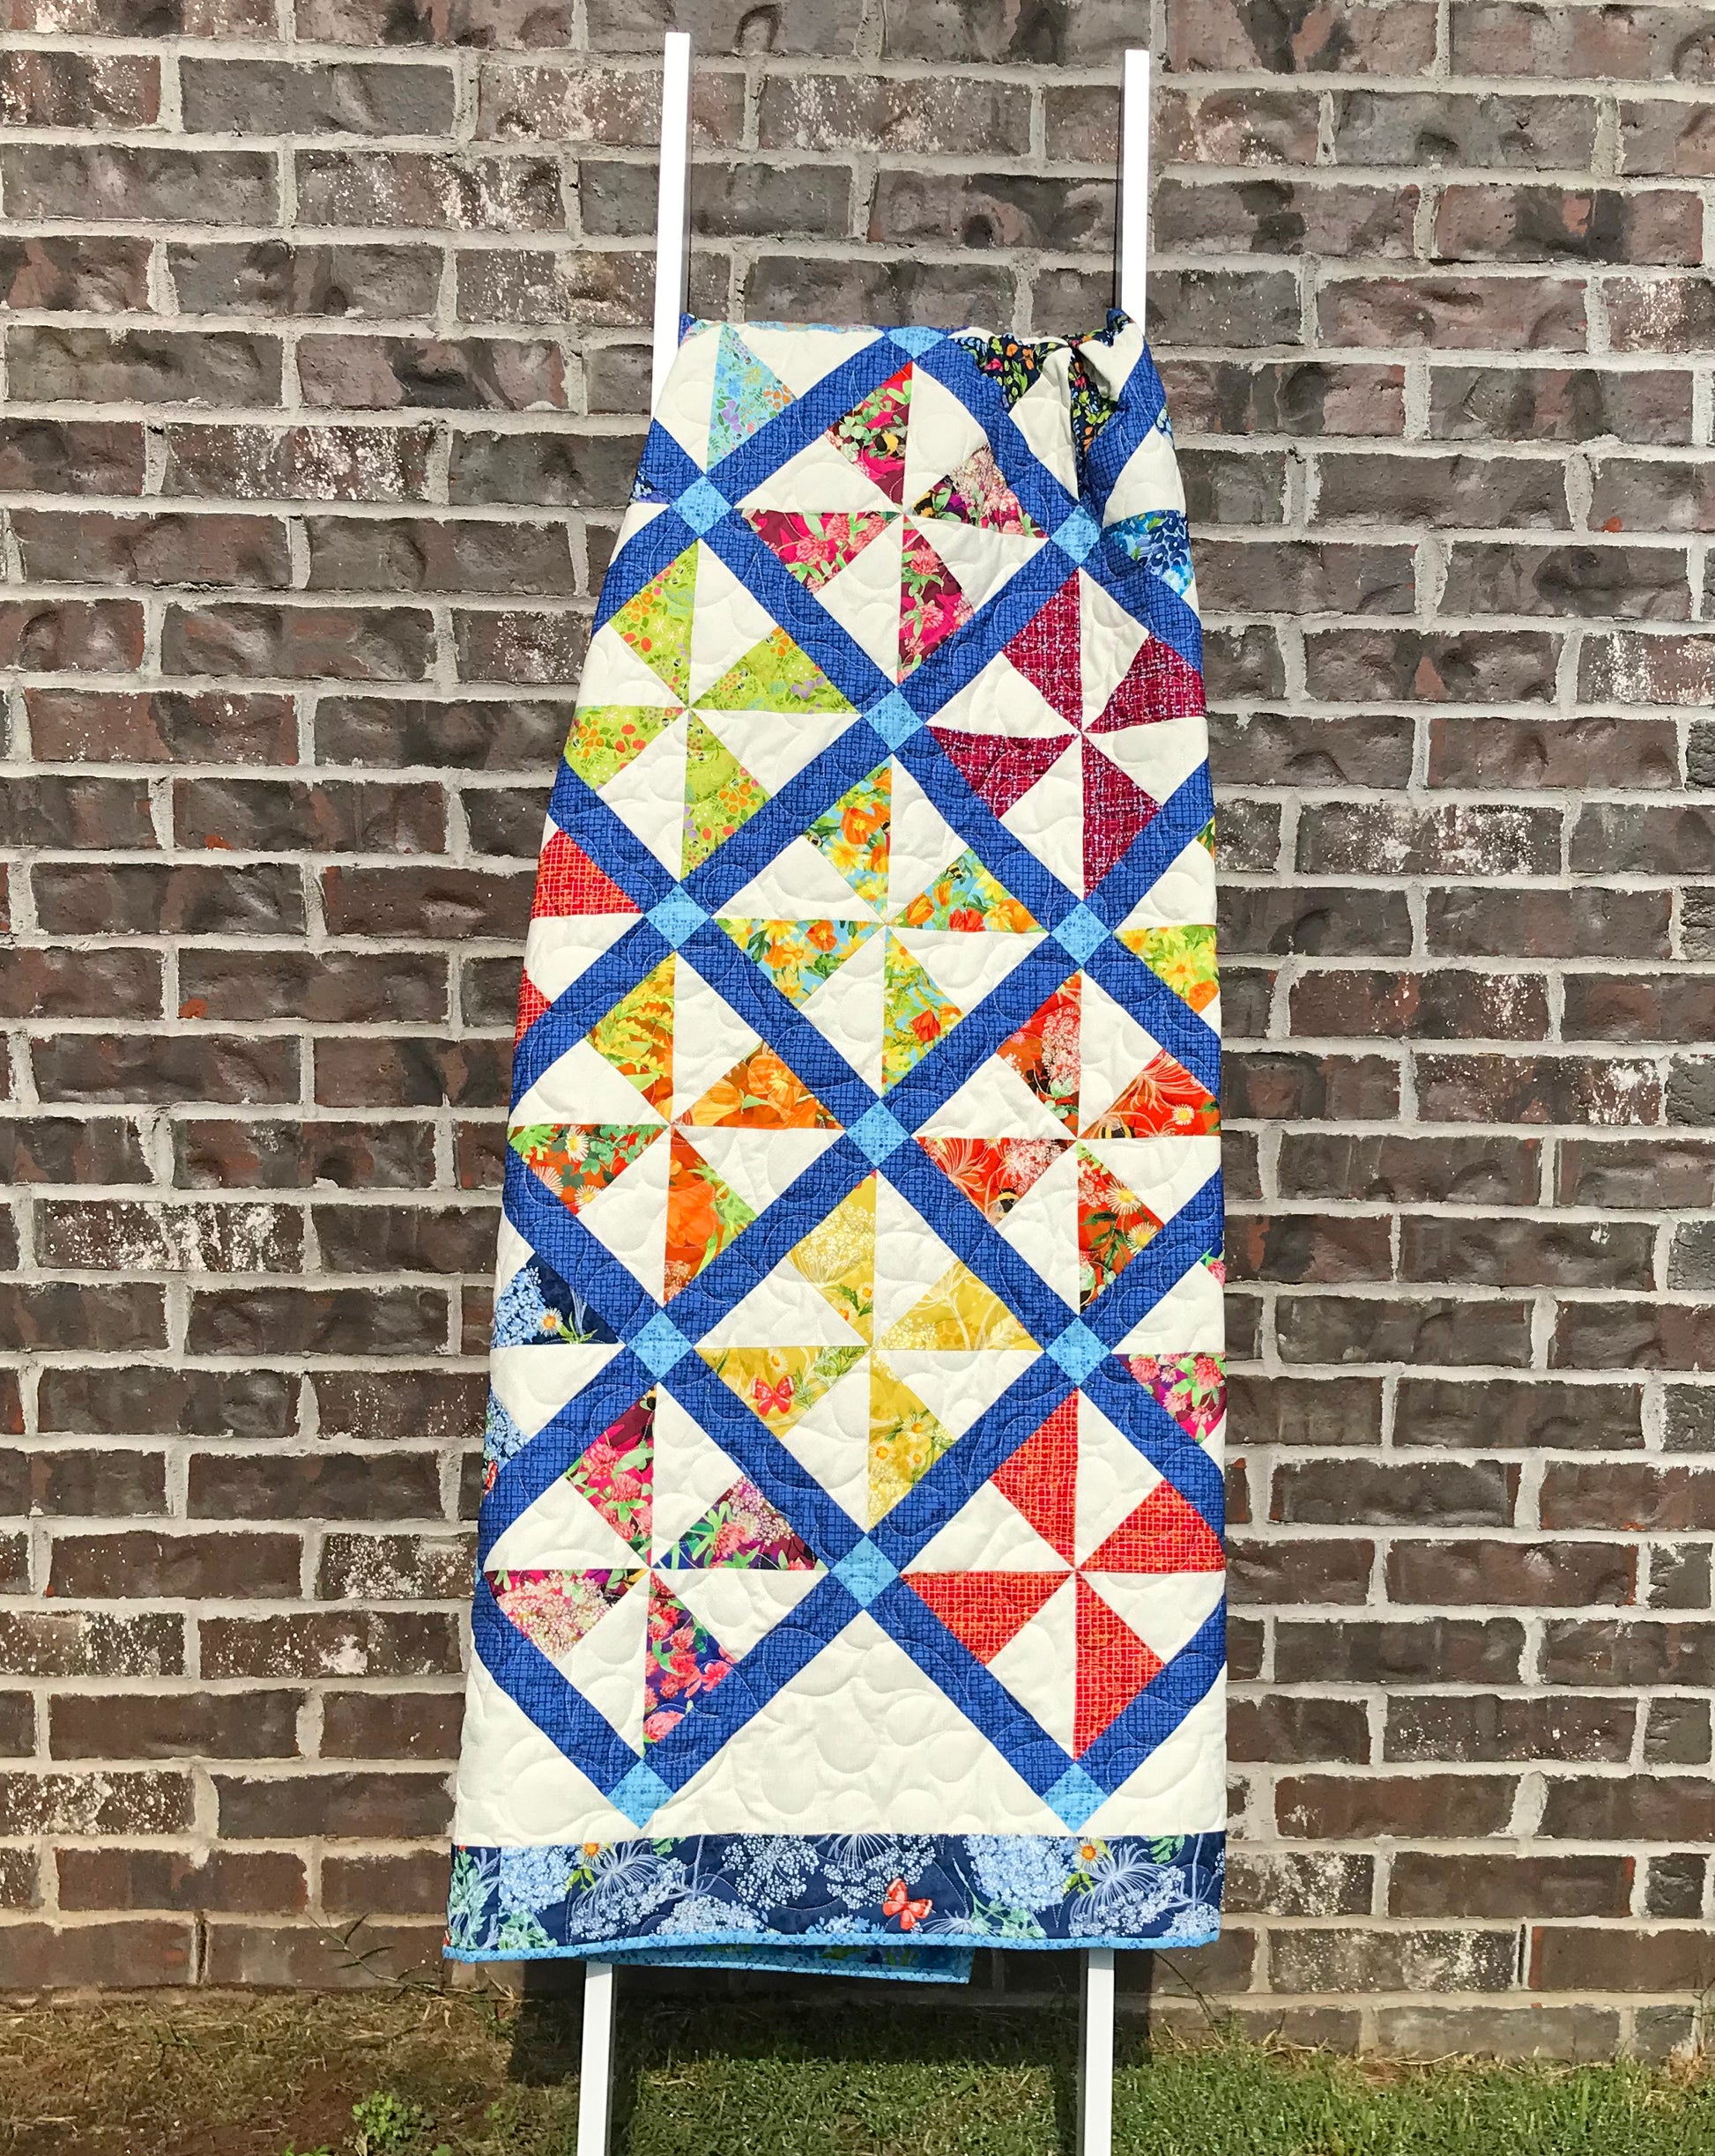 Pinwheel Parade quilt pattern featuring pinwheel blocks set on-point with sashing between the blocks and a floral border. Quilt is shown hanging on a ladder.